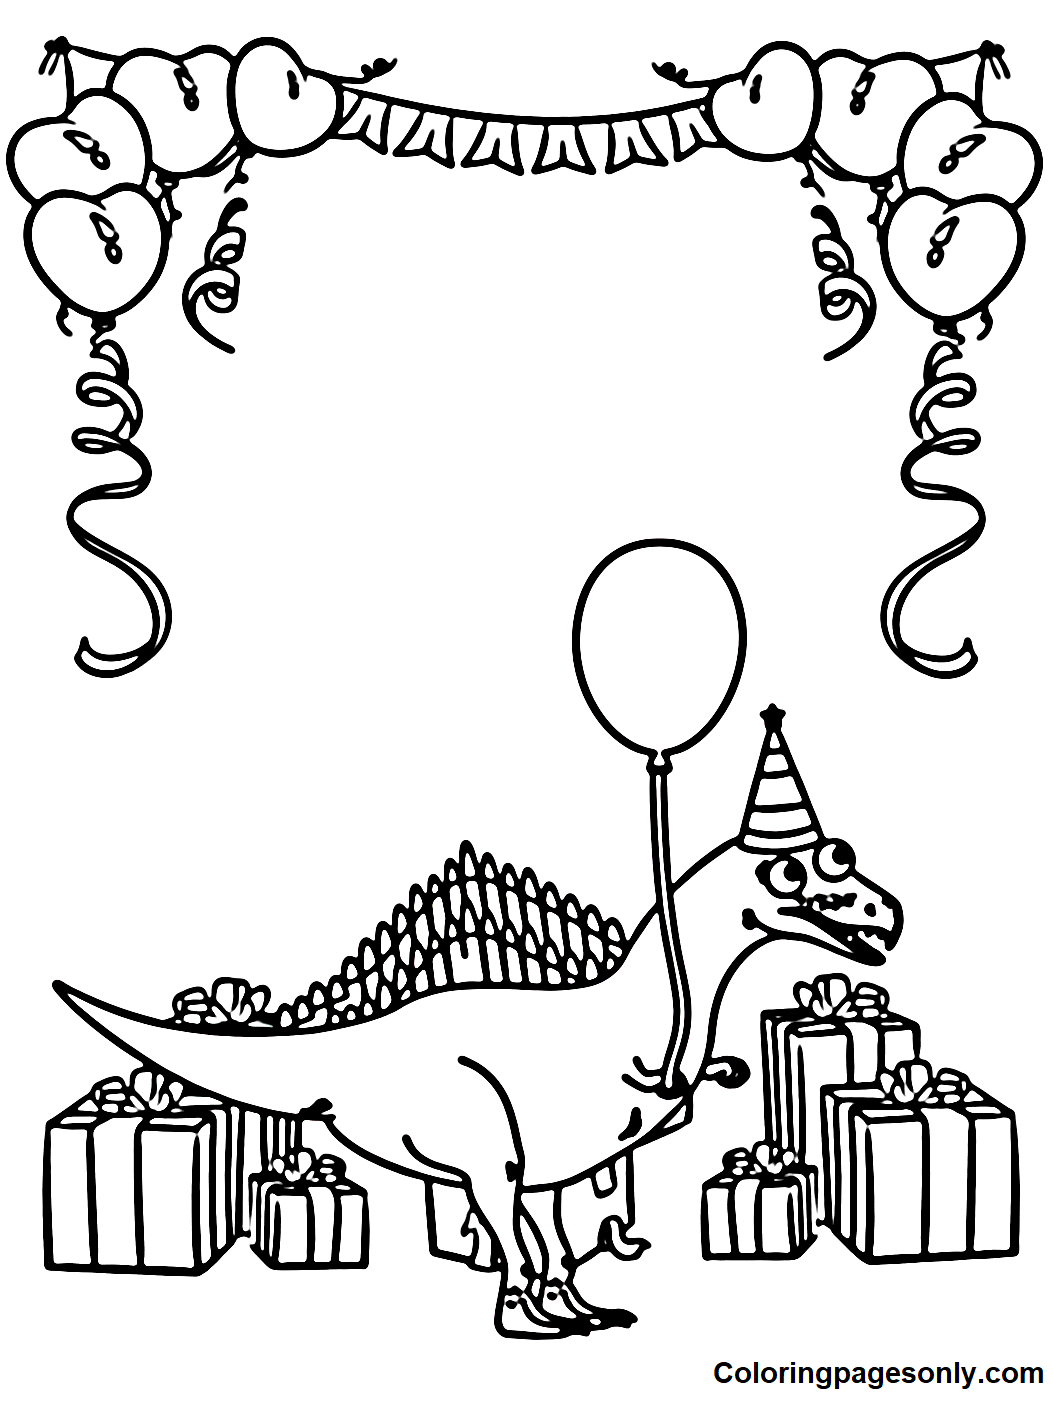 Spinosaurus with Balloon Coloring Pages